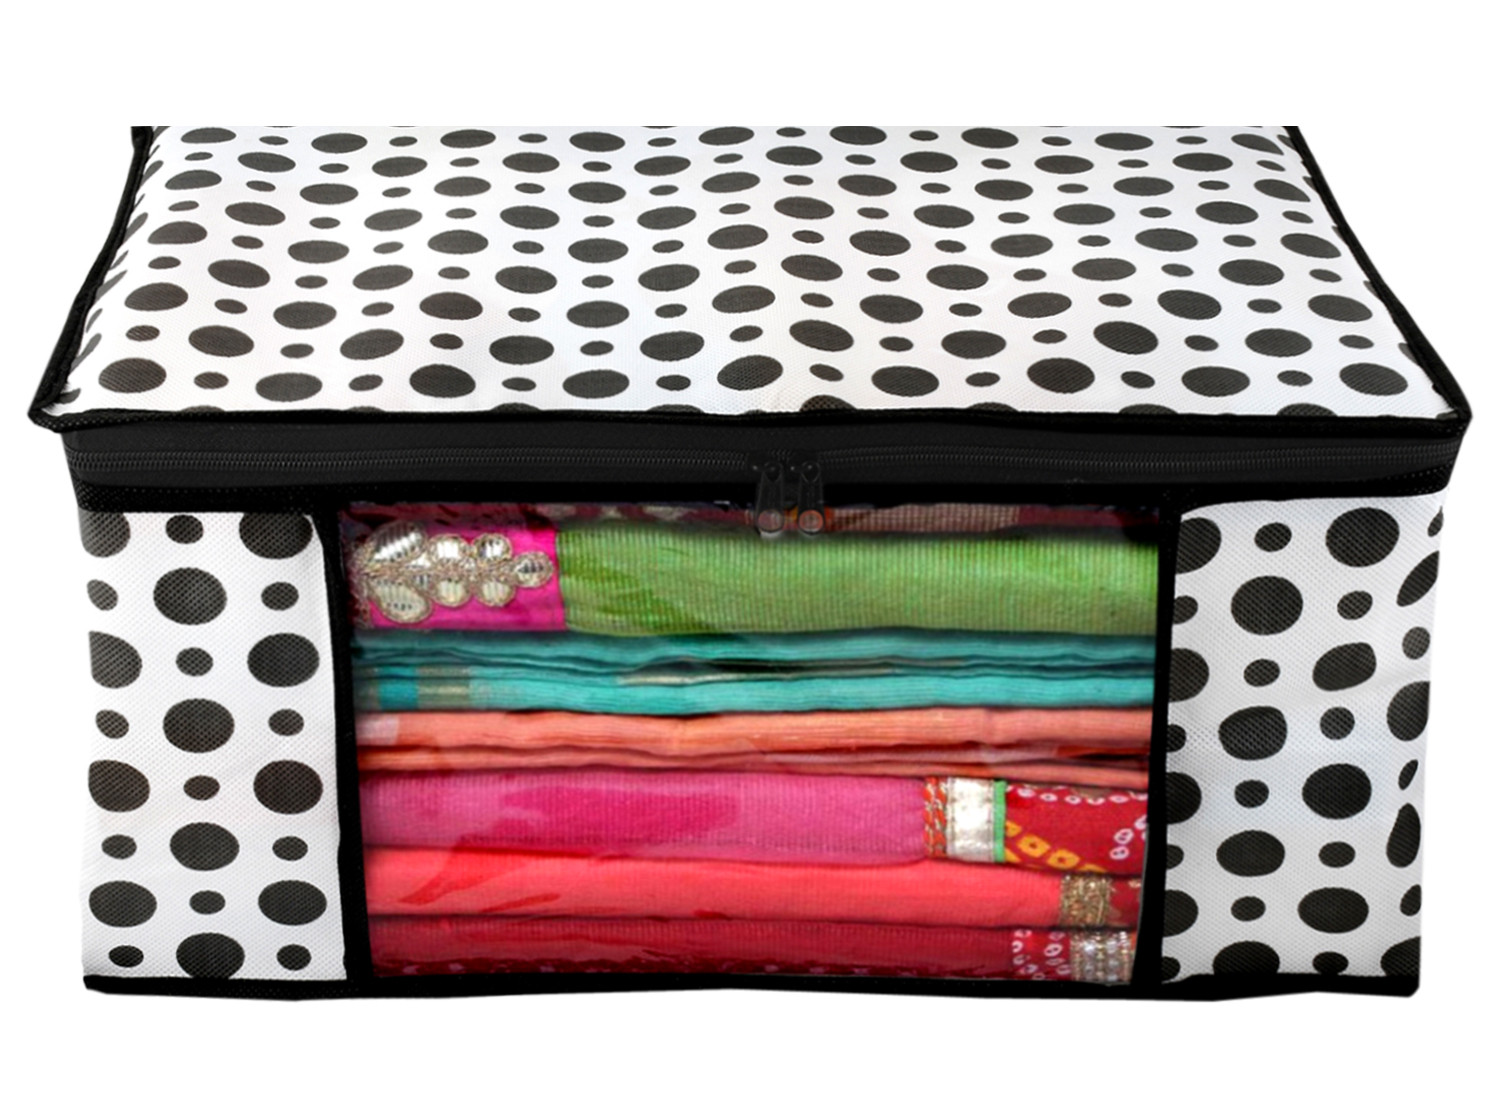 Kuber Industries Polka Dots Design Non Woven Saree Cover And Underbed Storage Bag, Storage Organiser, Blanket Cover (Black & White) -CTKTC38119